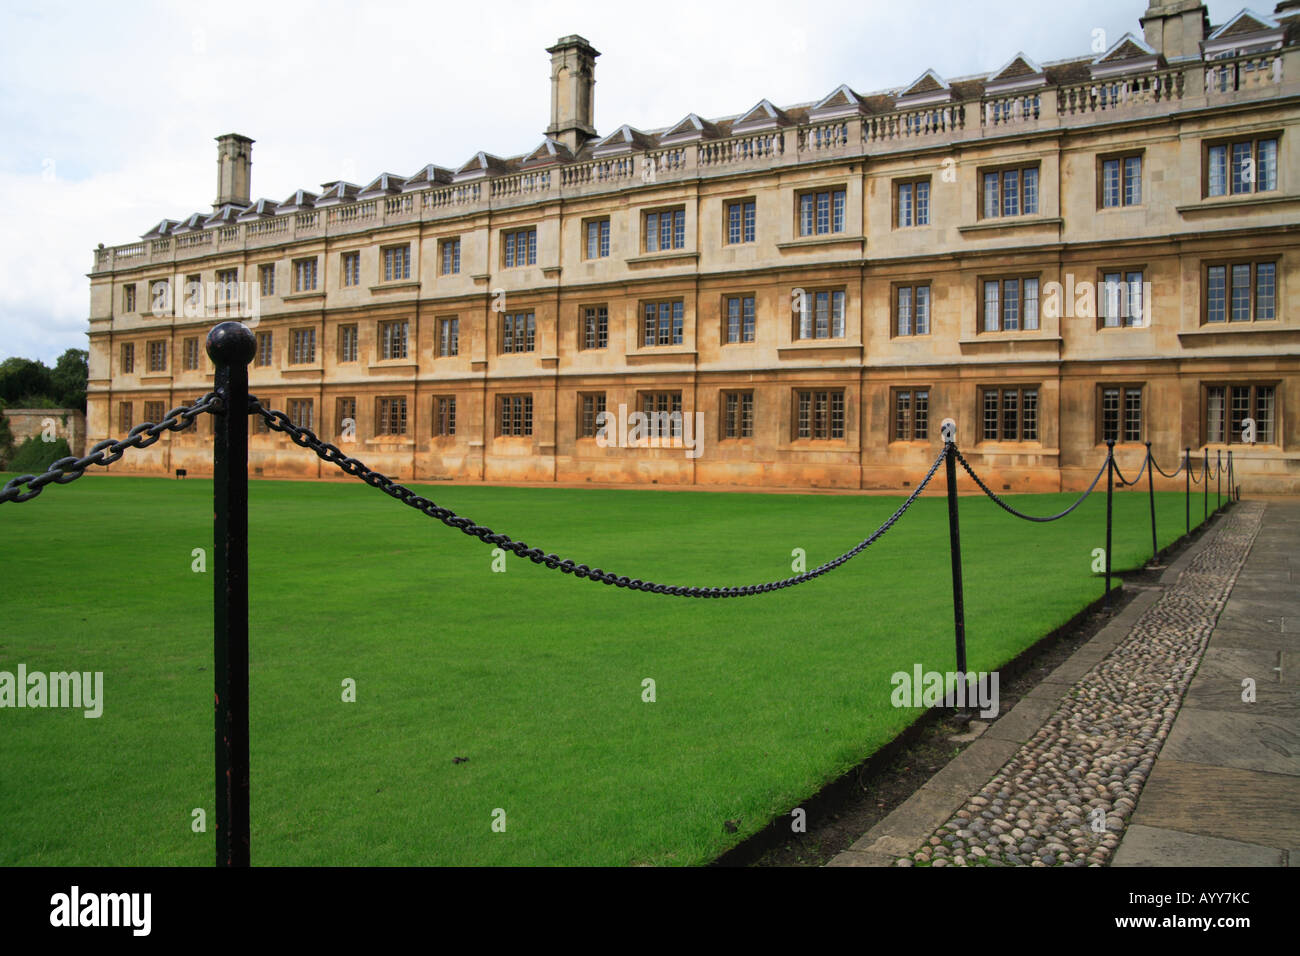 'Clare College' from 'Kings College', Cambridge University. Stock Photo